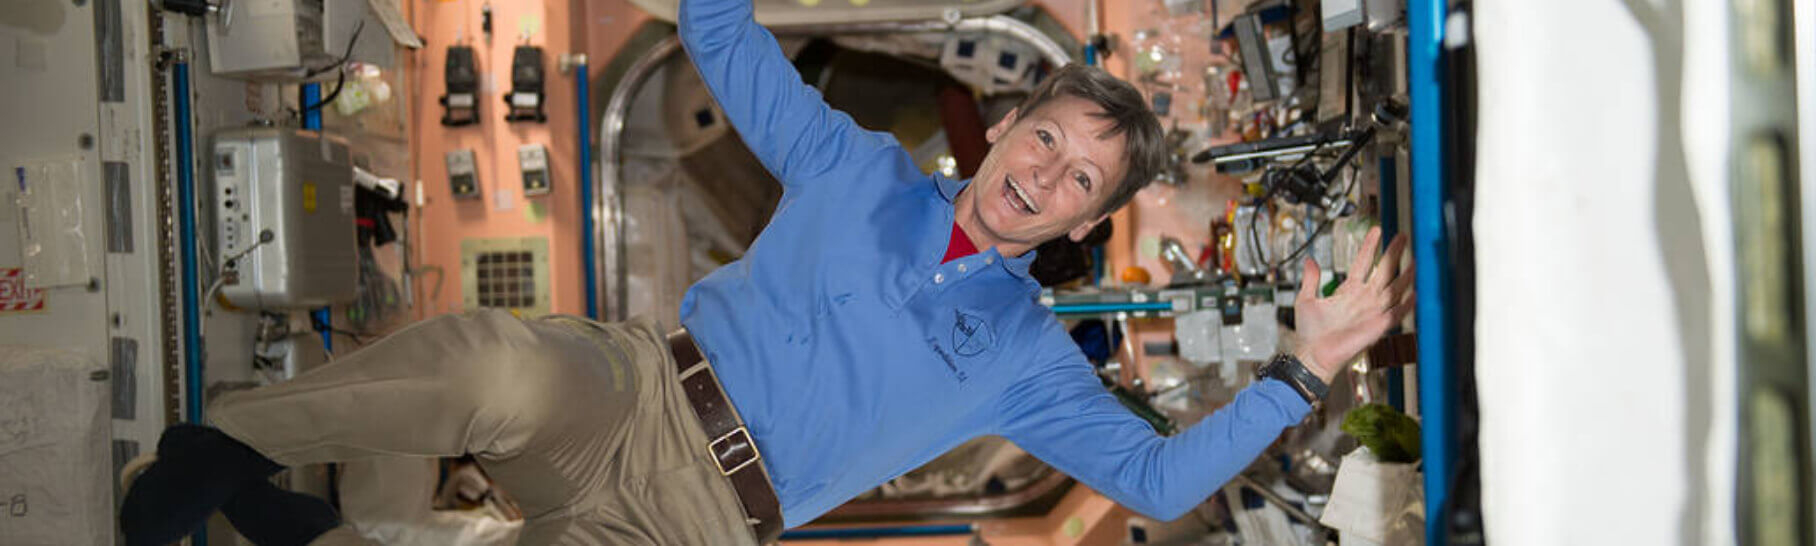 Astronaut Peggy Whitson photo on space station